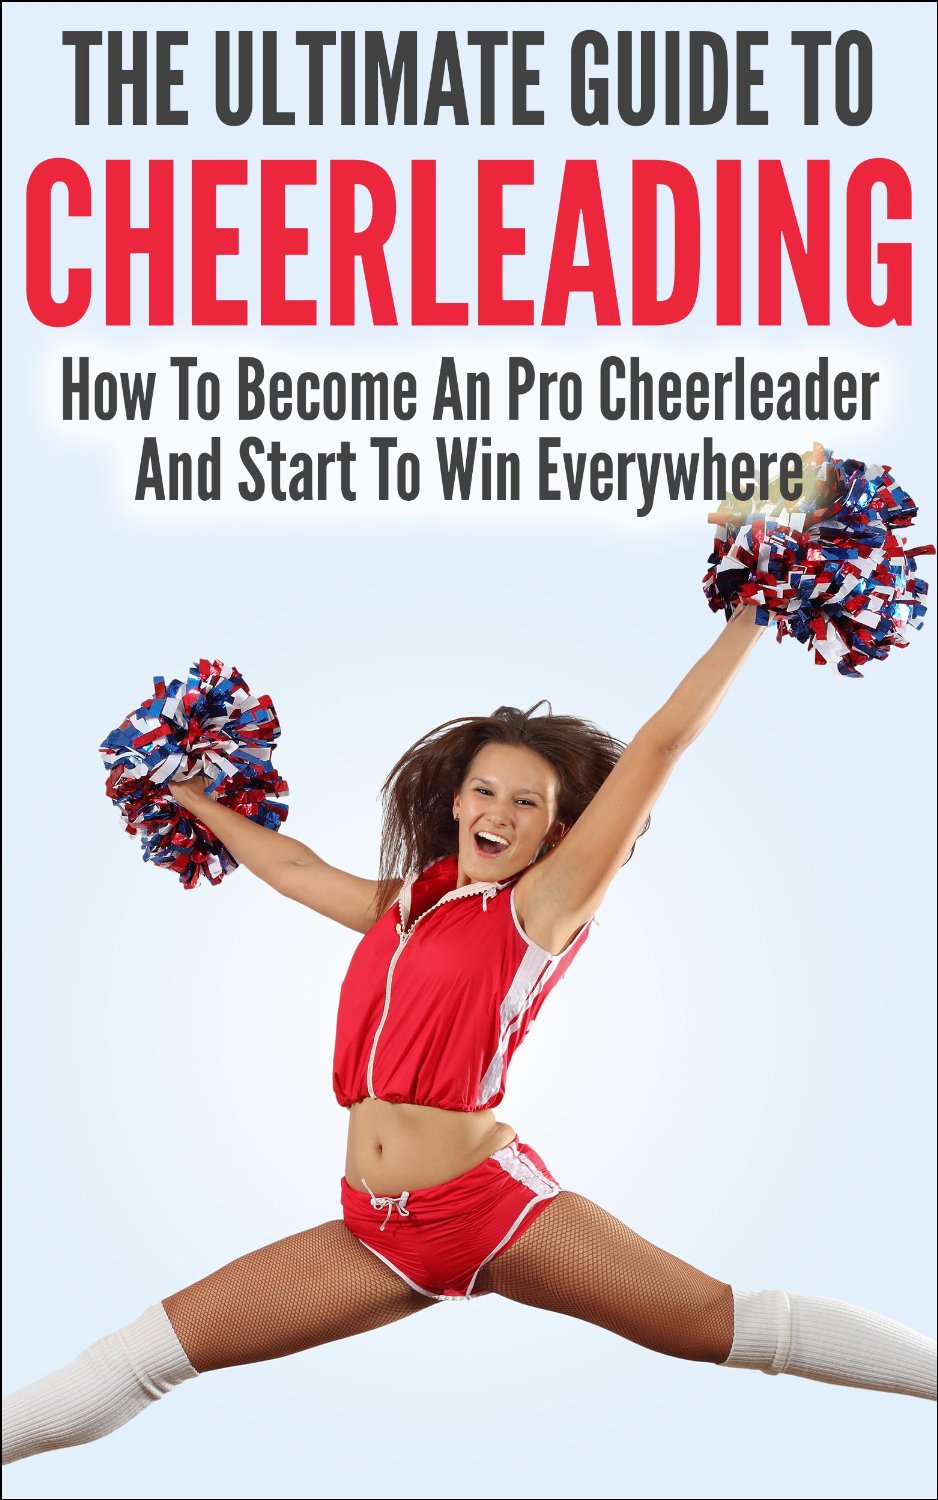 The Ultimate Guide To CheerLeading: How To Become A Pro Cheerleader And Start To Win Everywhere by Allison Lewis